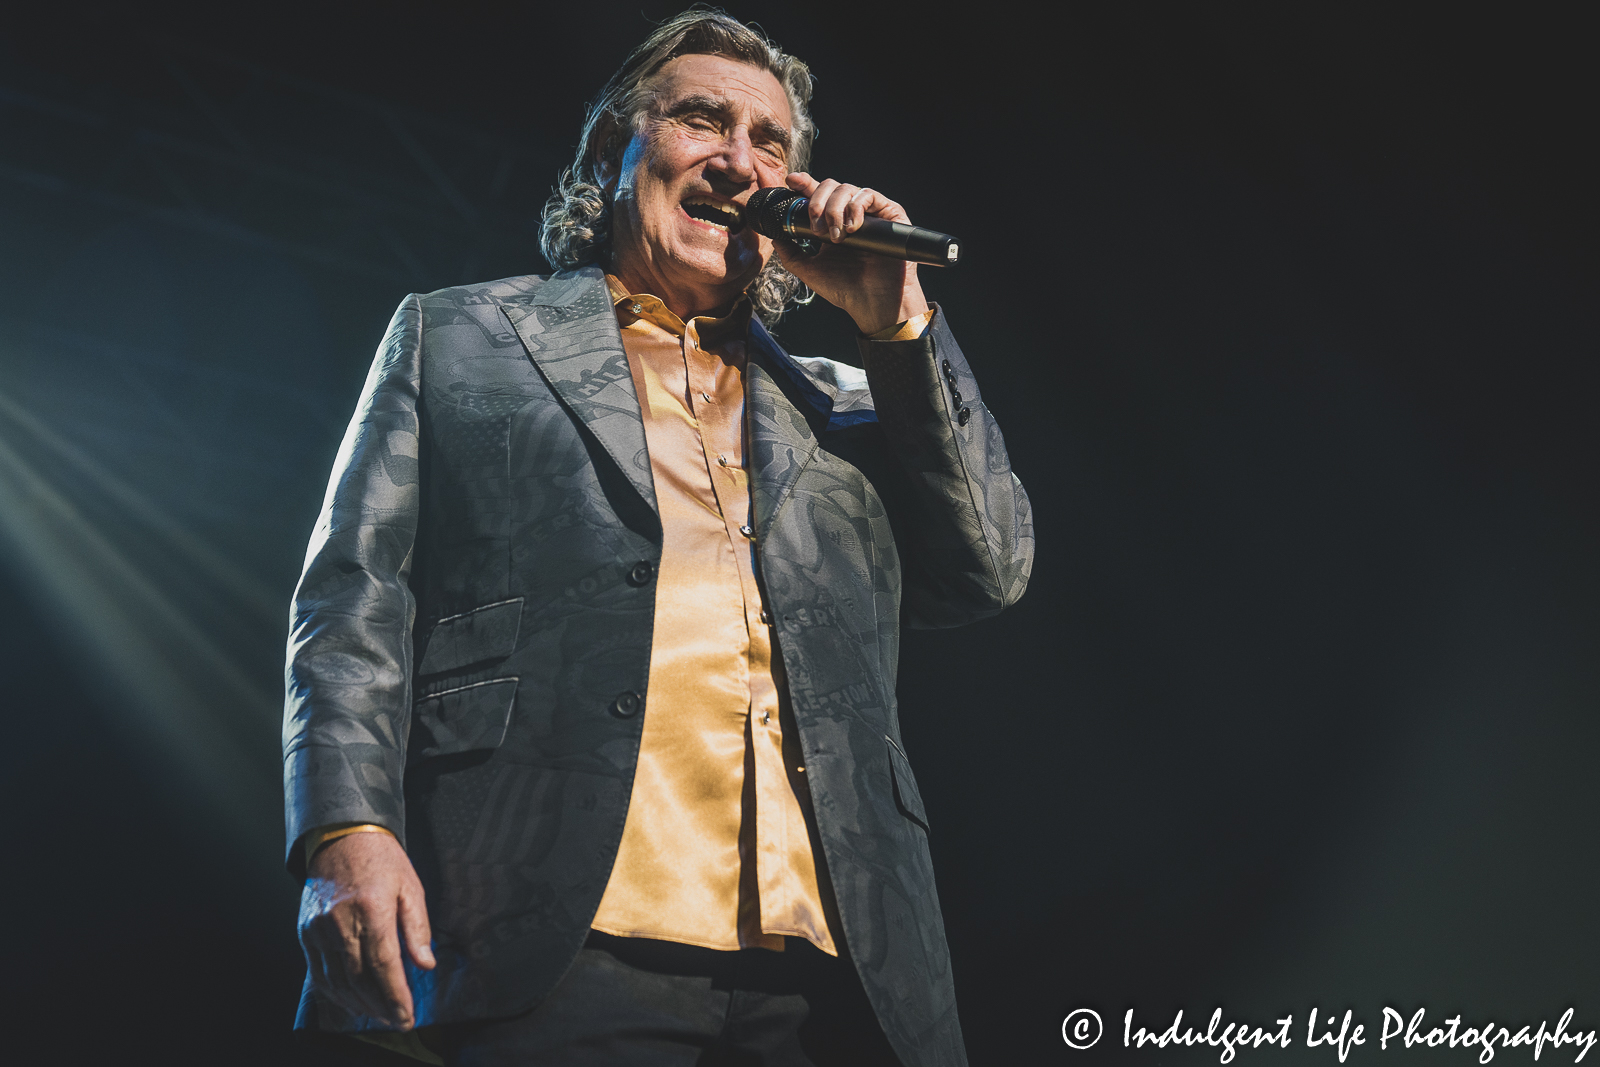 Bass singer Richard Sterban of country and gospel music group The Oak Ridge Boys performing live at Ameristar Casino's Star Pavilion in Kansas City, MO on September 24, 2021.